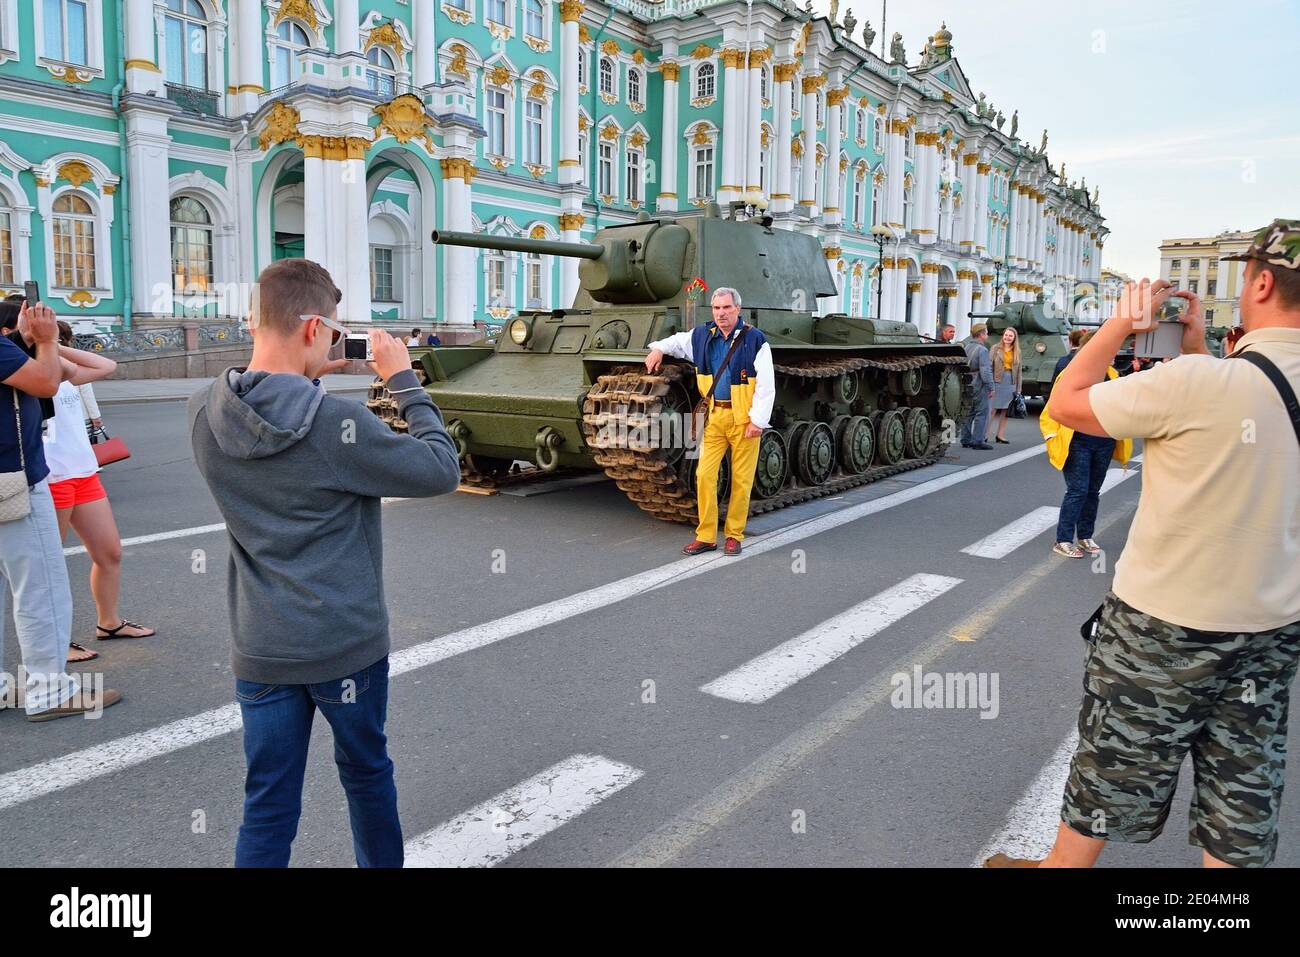 ST.PETERSBURG, RUSSIA - AUGUST 08, 2017: People photographed against the backdrop of Soviet heavy tank KV-1 on the background of the Winter Palace Stock Photo